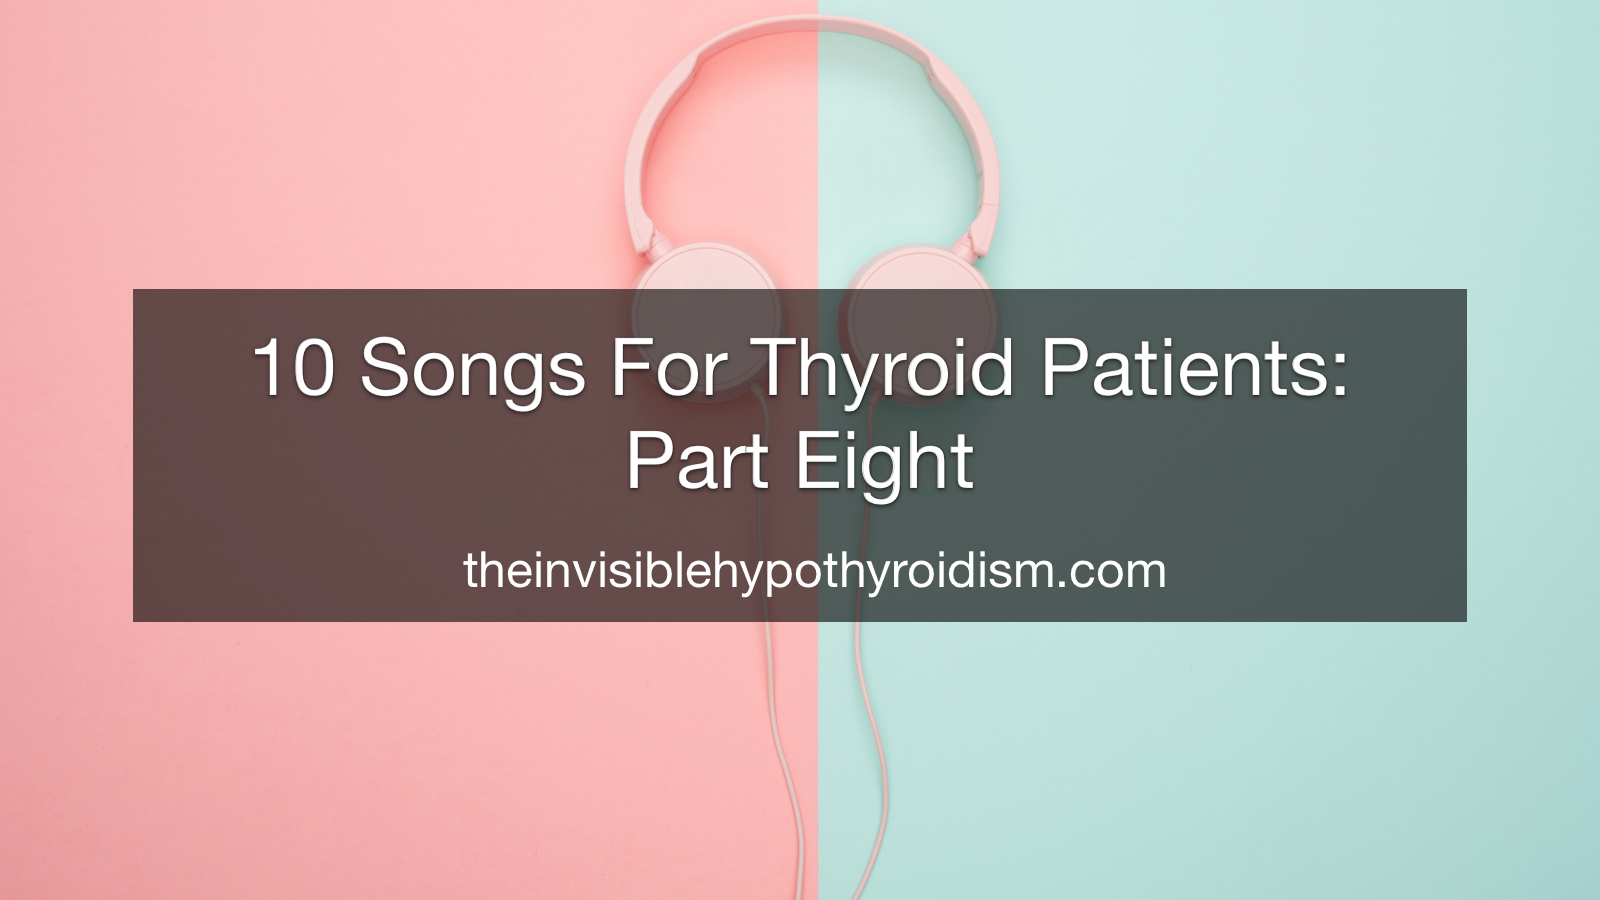 10 Songs For Thyroid Patients: Part Eight